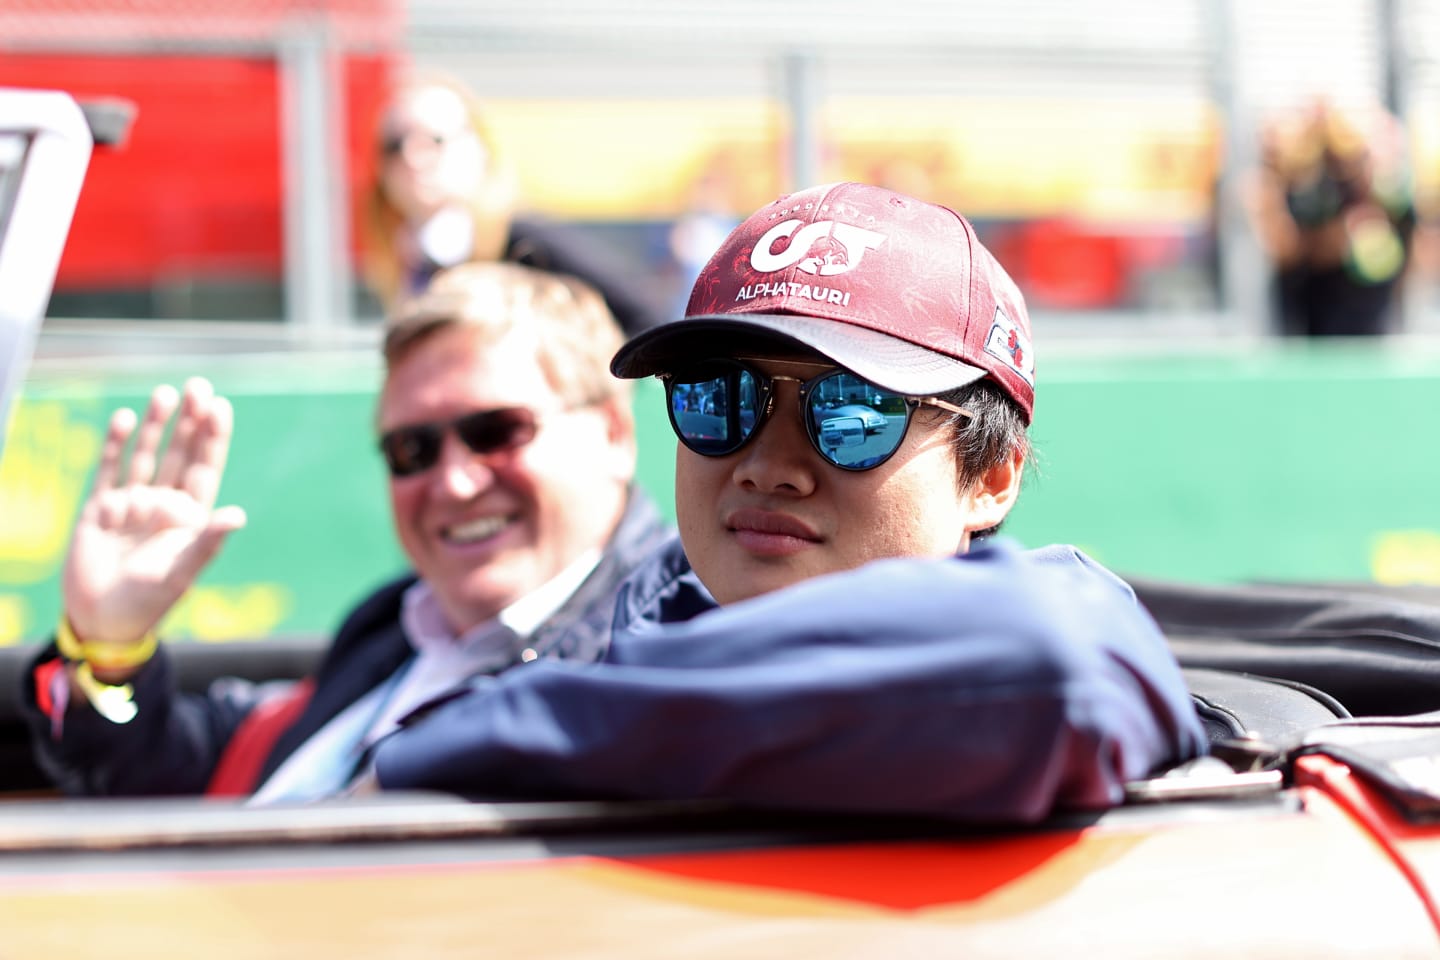 SPA, BELGIUM - AUGUST 28: Yuki Tsunoda of Japan and Scuderia AlphaTauri looks on from the drivers parade prior to the F1 Grand Prix of Belgium at Circuit de Spa-Francorchamps on August 28, 2022 in Spa, Belgium. (Photo by Peter Fox/Getty Images)